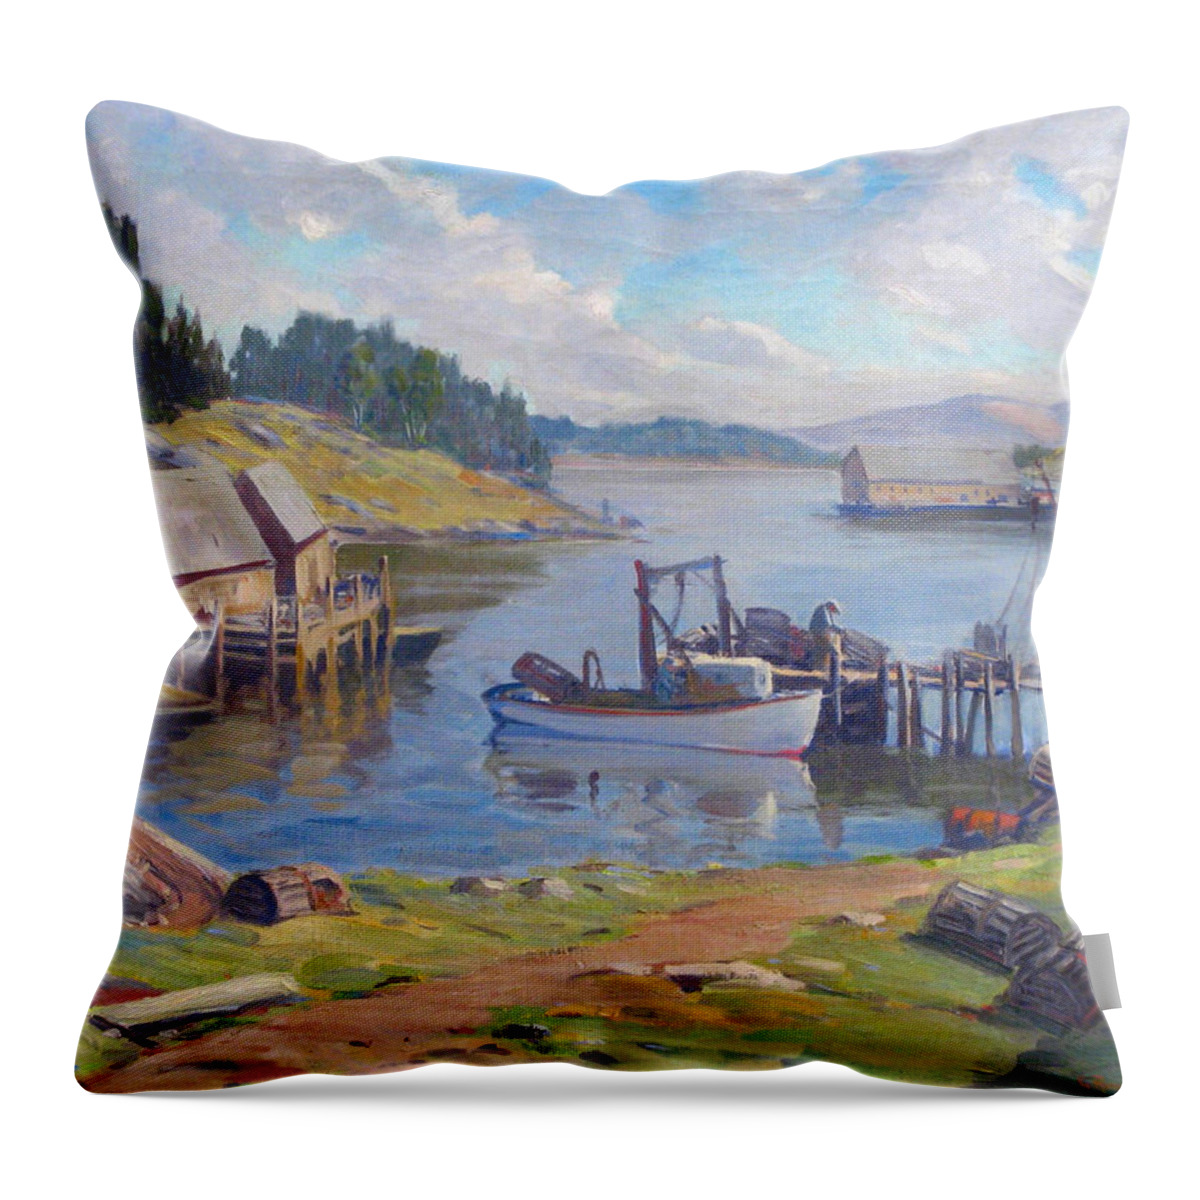 Round Pond Throw Pillow featuring the painting Round Pond by Lin Grosvenor